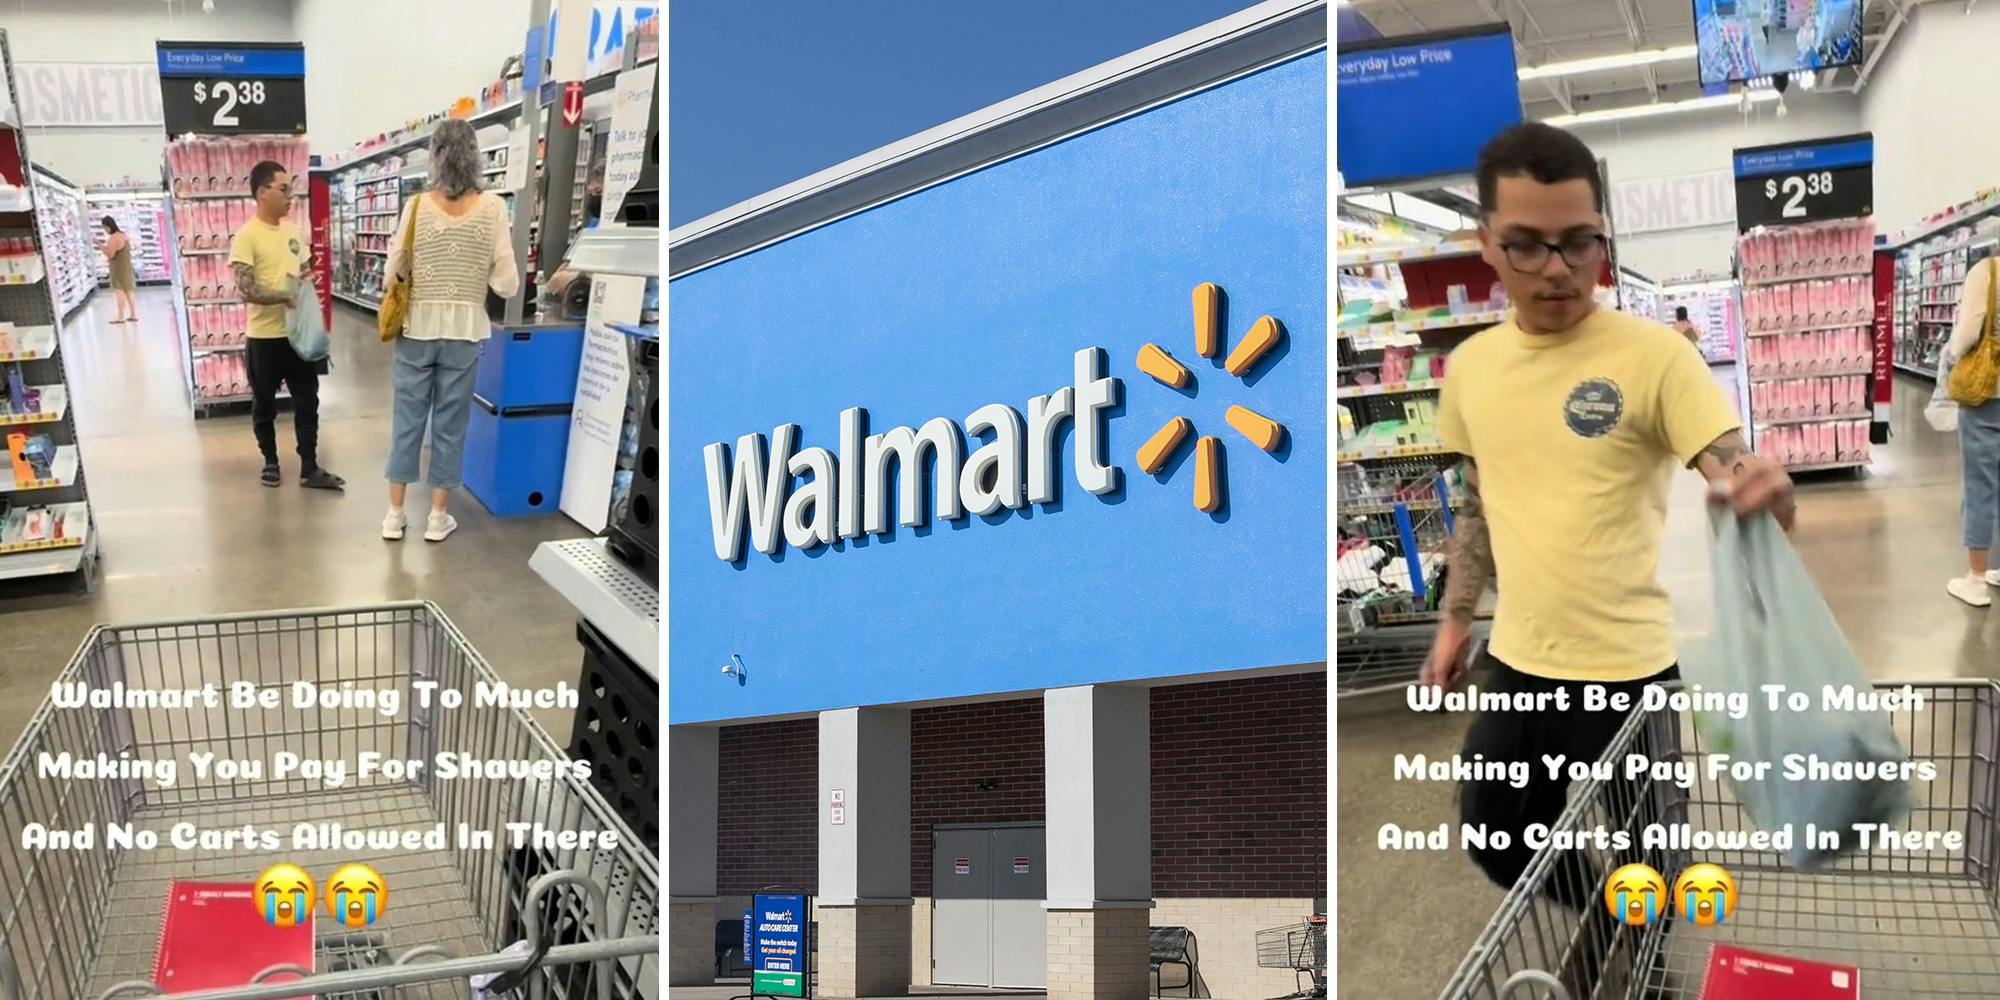 Walmart shopper says her cart wasn't allowed in makeup section, was forced to pay for shavers right then and there